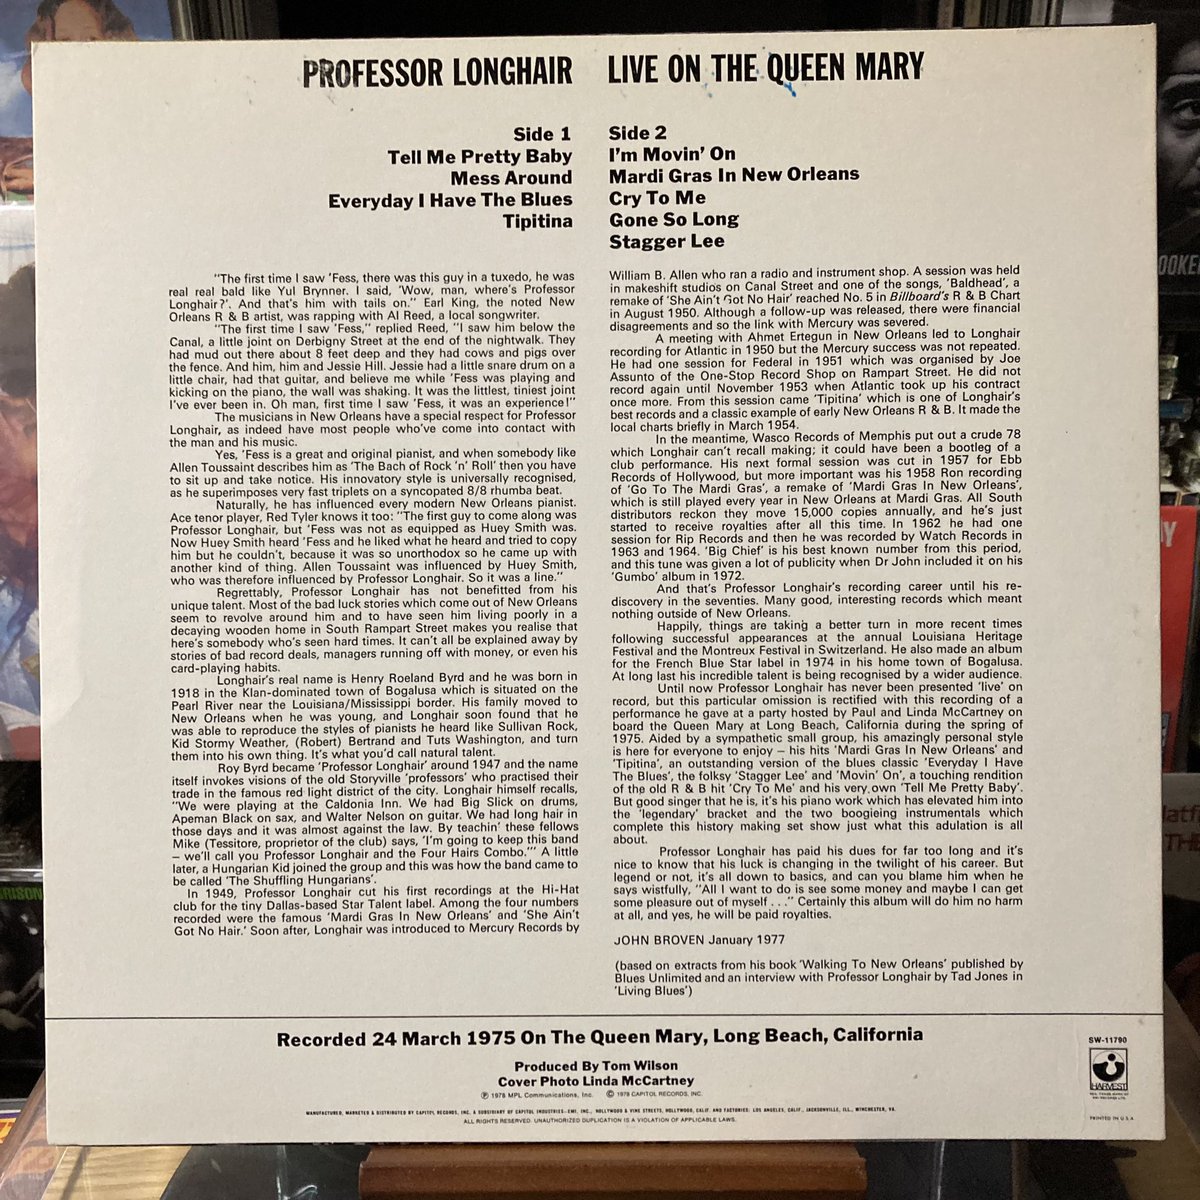 Professor Longhair/Live On The Queen Mary
#nowplaying 
#vinyl #records #recordcollection
#cds #cdcollection
#professorlonghair